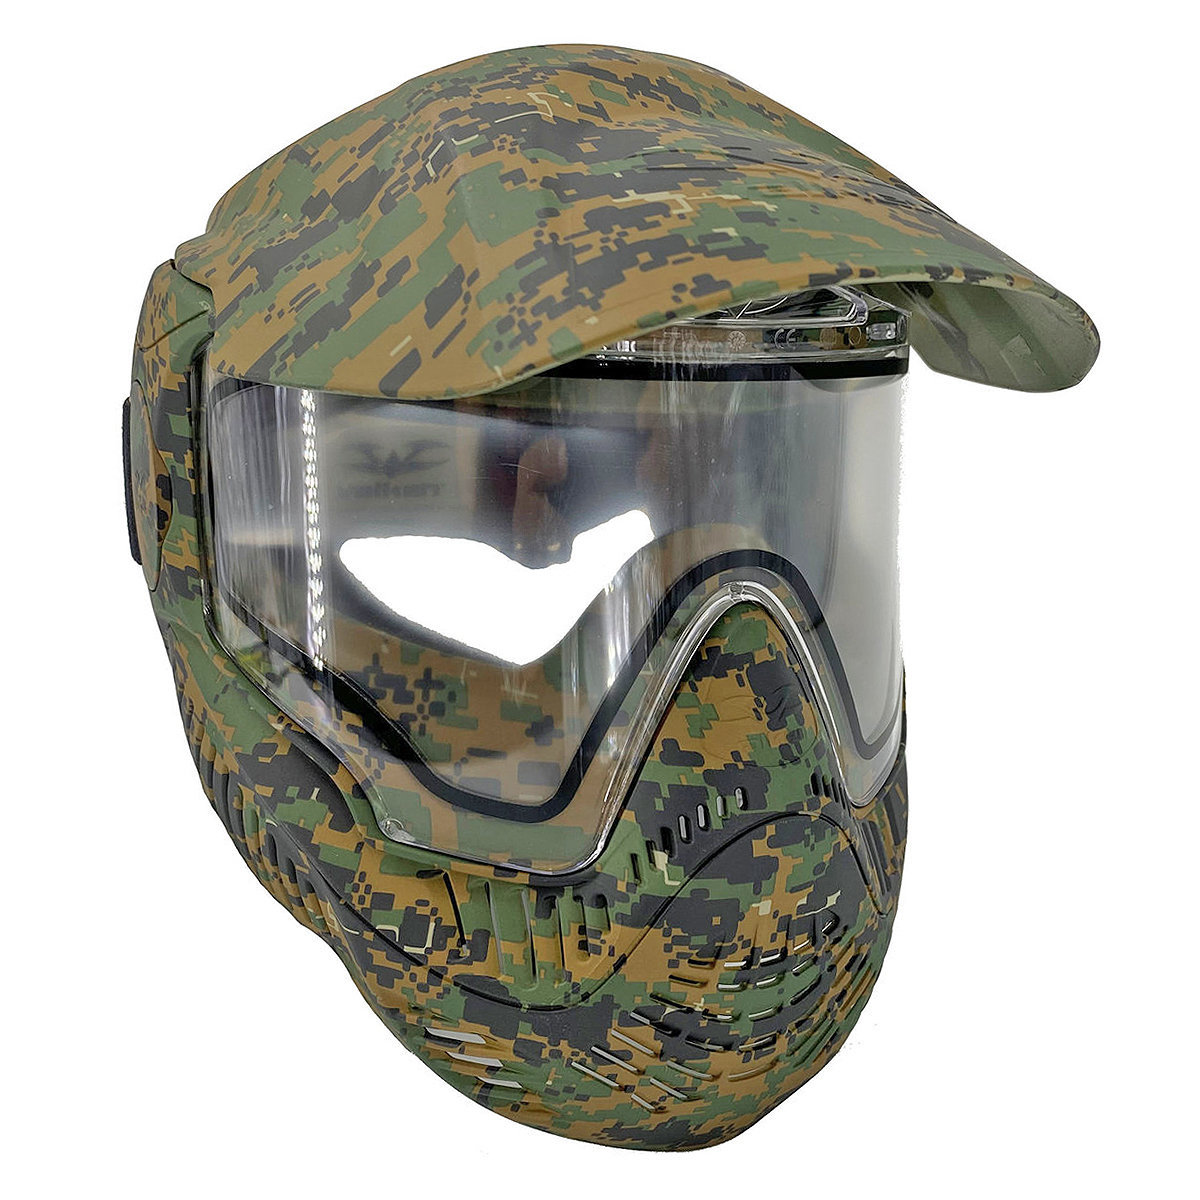 Digi Camo US Army Airsoft Paintball Face Mask Helmet Ranger Protection Clean